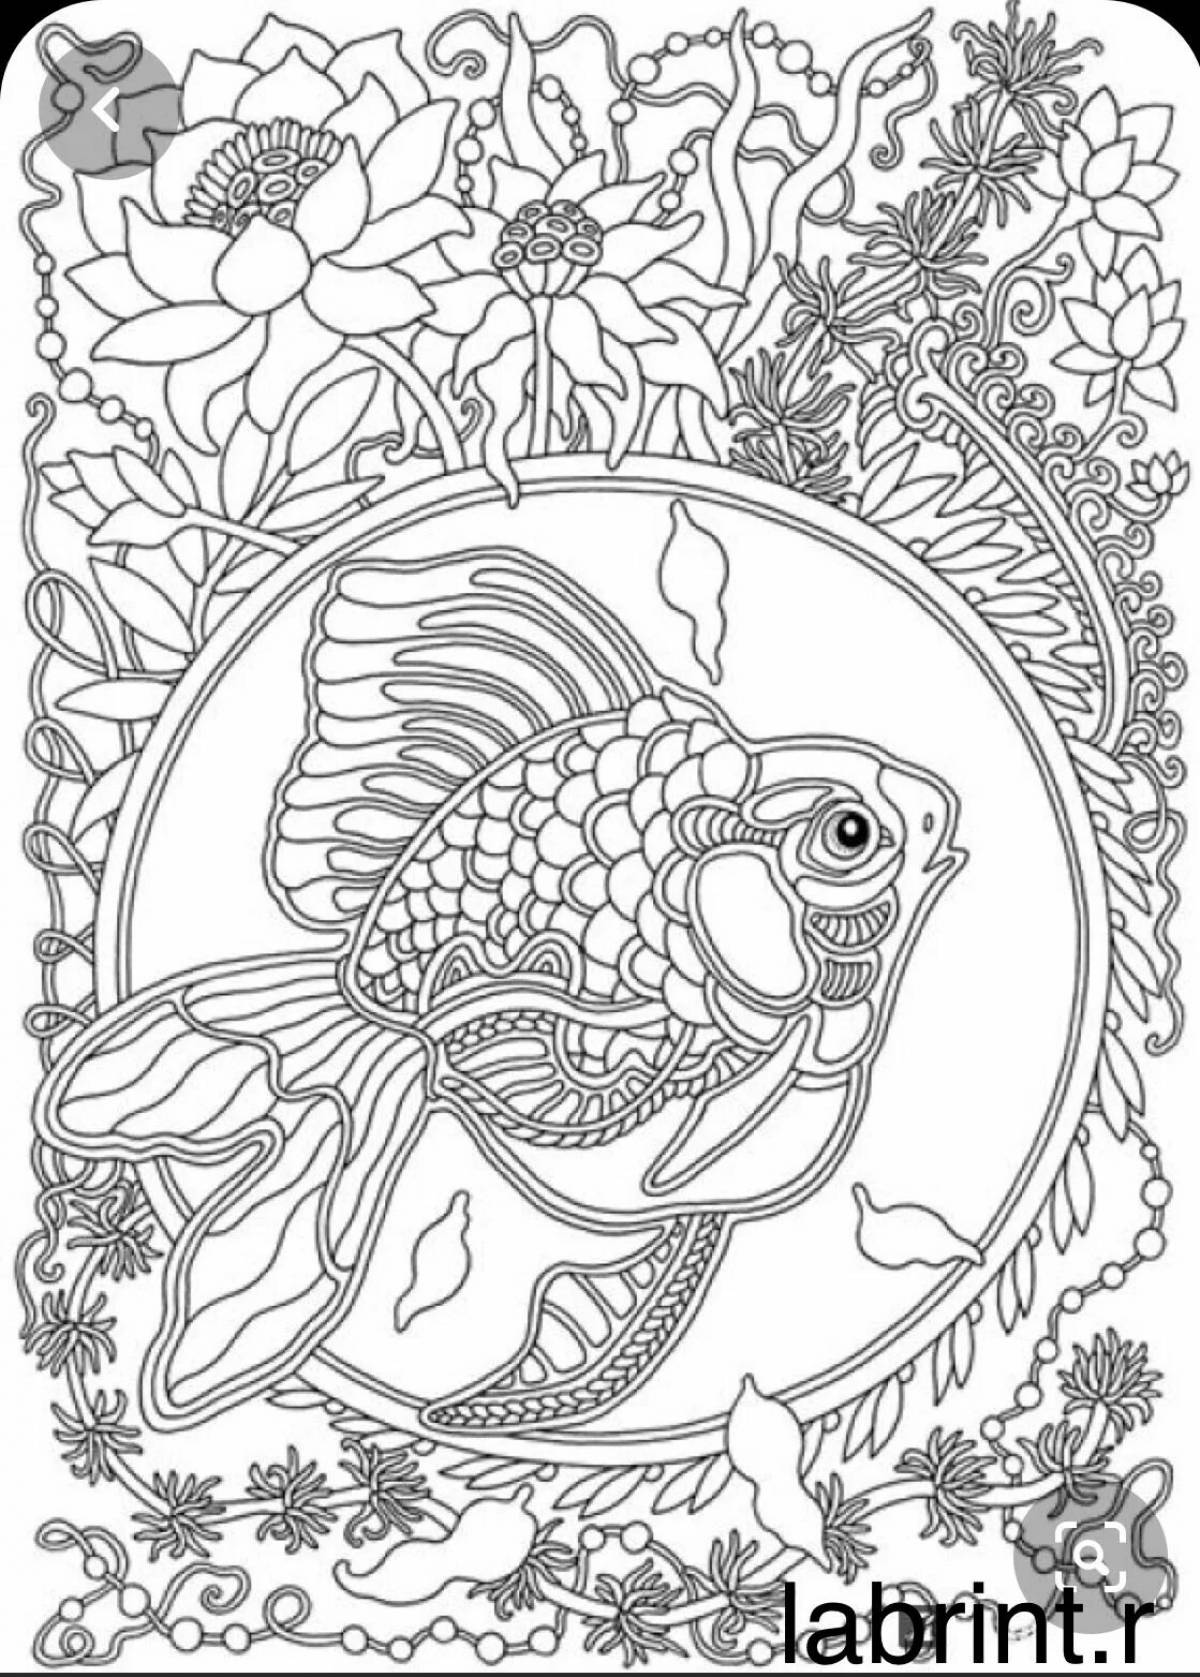 Fancy coloring book relaxation antistress for adults